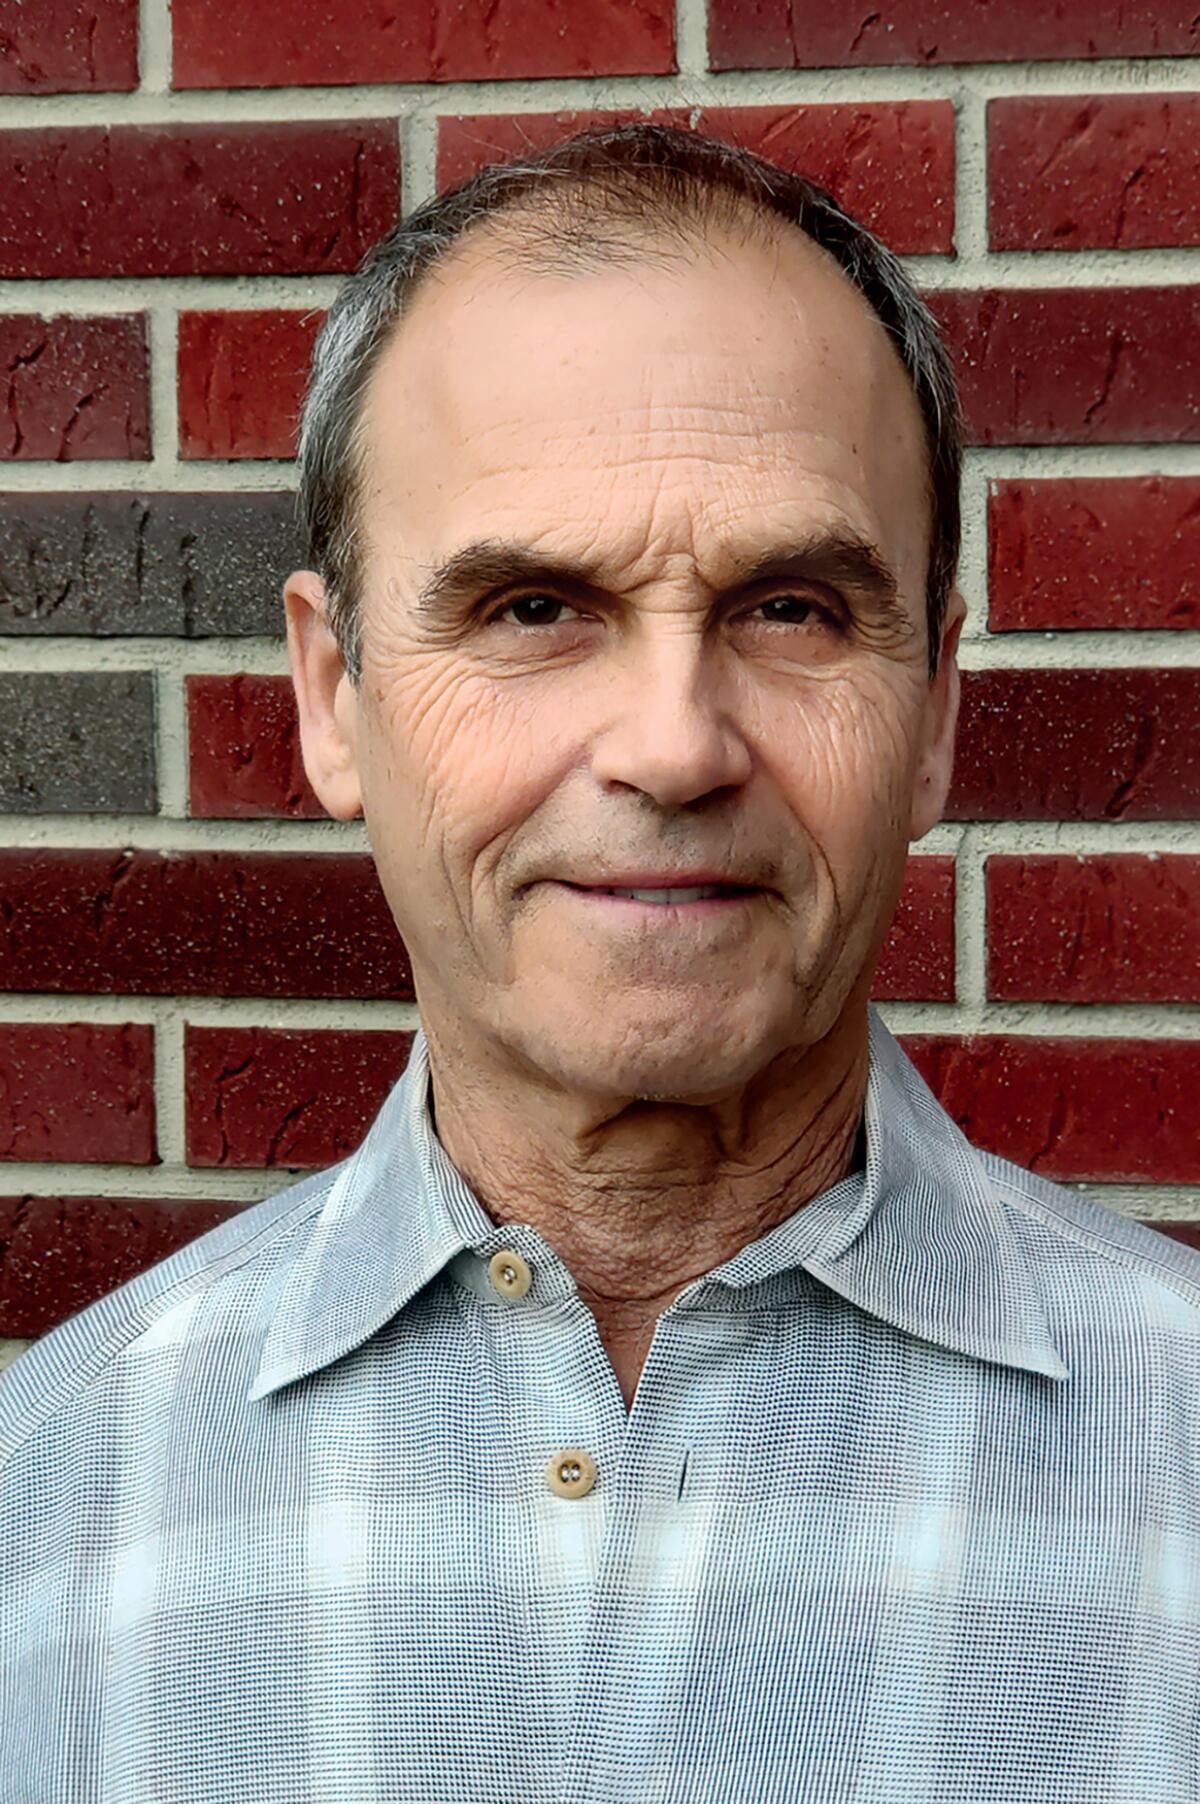 A balding man in a windowpane-checked shirt stands in front of a brick wall.